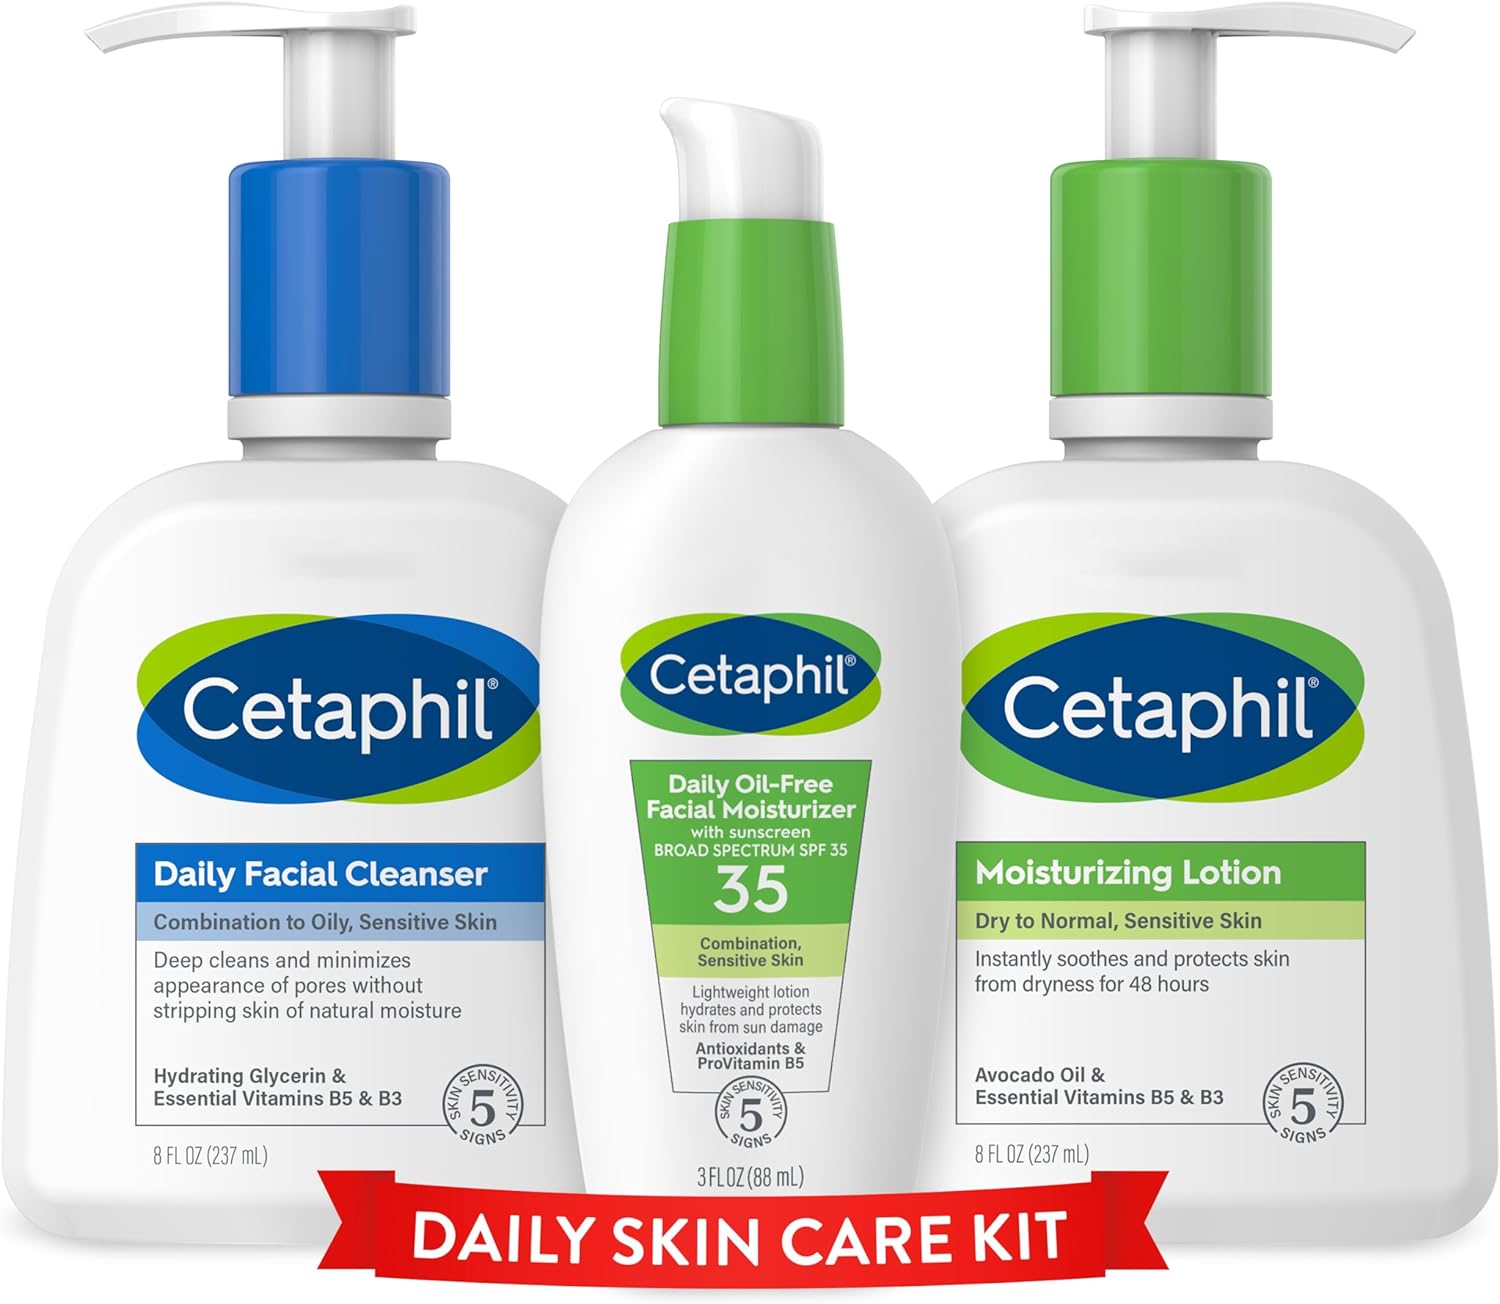 Cetaphil Sensitive Skincare Holiday Kit, Daily Facial Cleanser 8 oz, Moisturizing Lotion 8 oz and Daily Facial SPF 35 Moisturizer 3oz -For Daily Sensitive Skin Routine